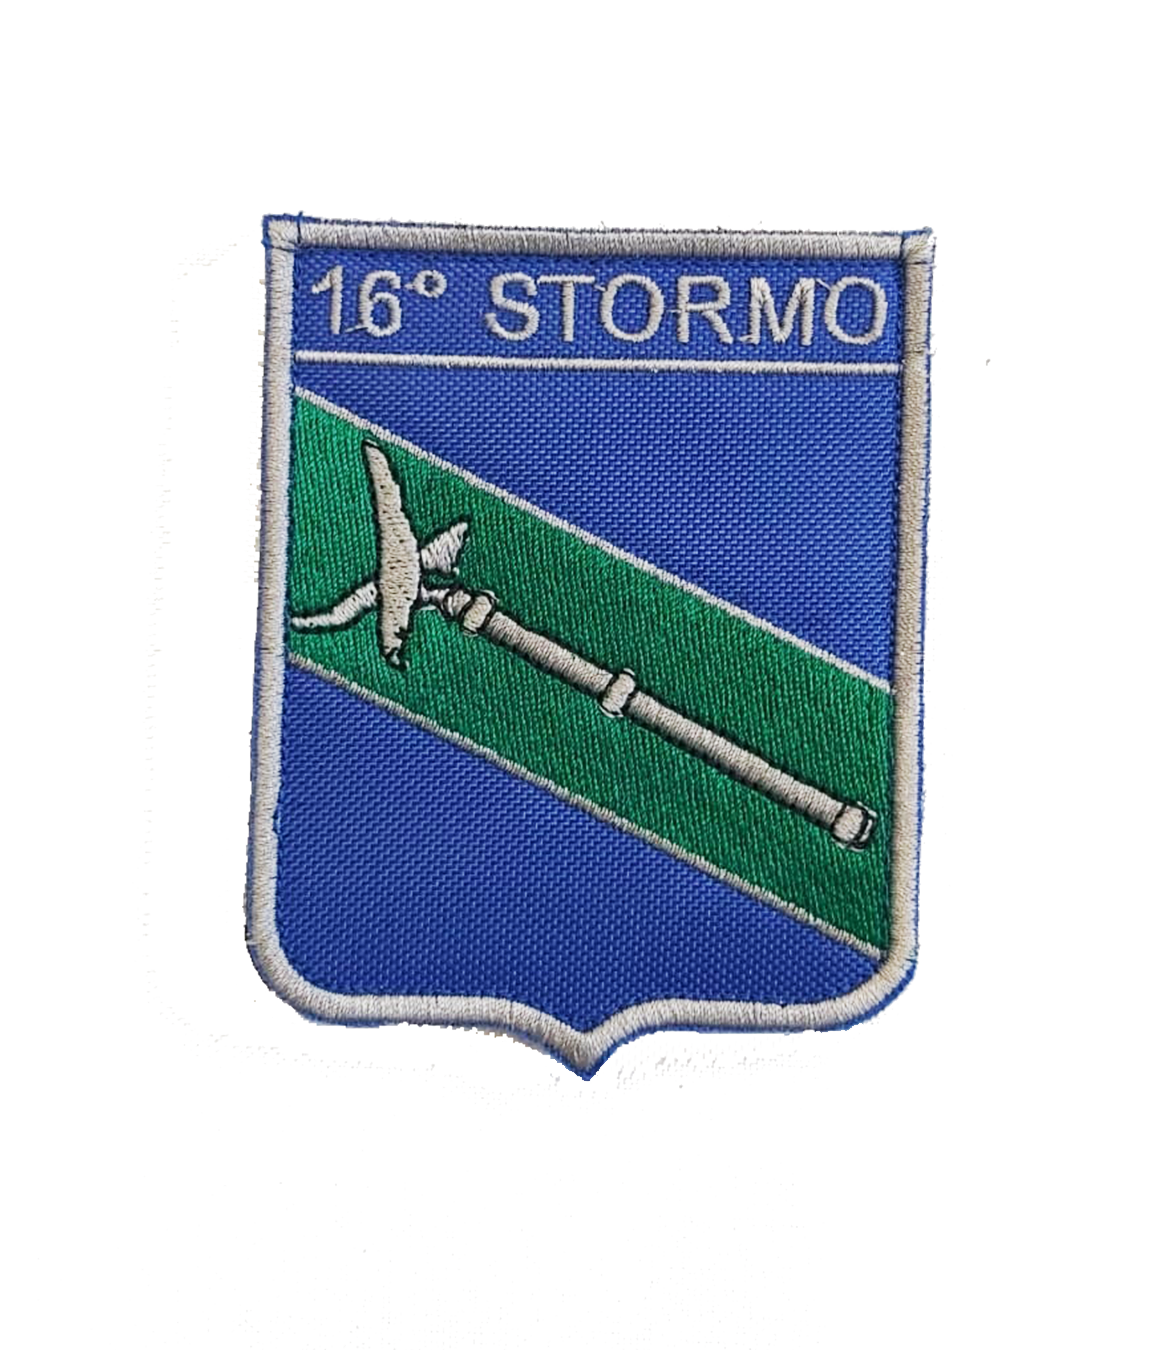 PATCH 16° STORMO